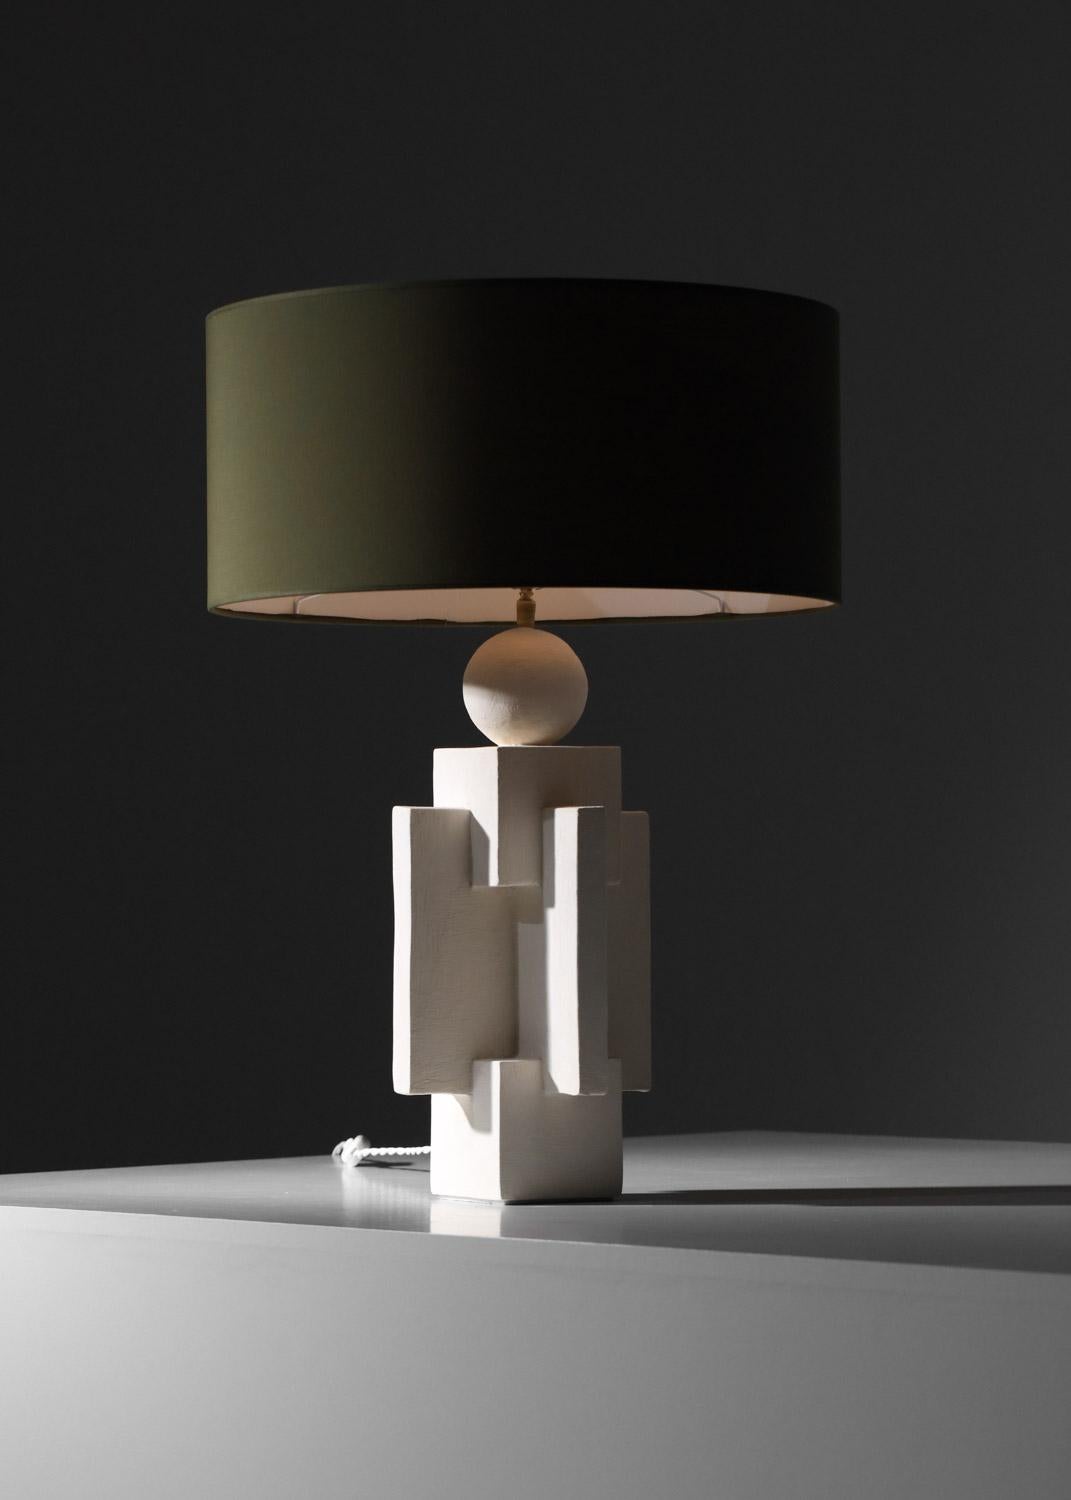 Large contemporary modernist-style table lamp. White plaster base structure with geometric shapes for a highly decorative, sculptural effect. Quality craftsmanship. Quantity on request. E27 LED bulb recommended. 
Dimensions : H. base 46 cm / W. base